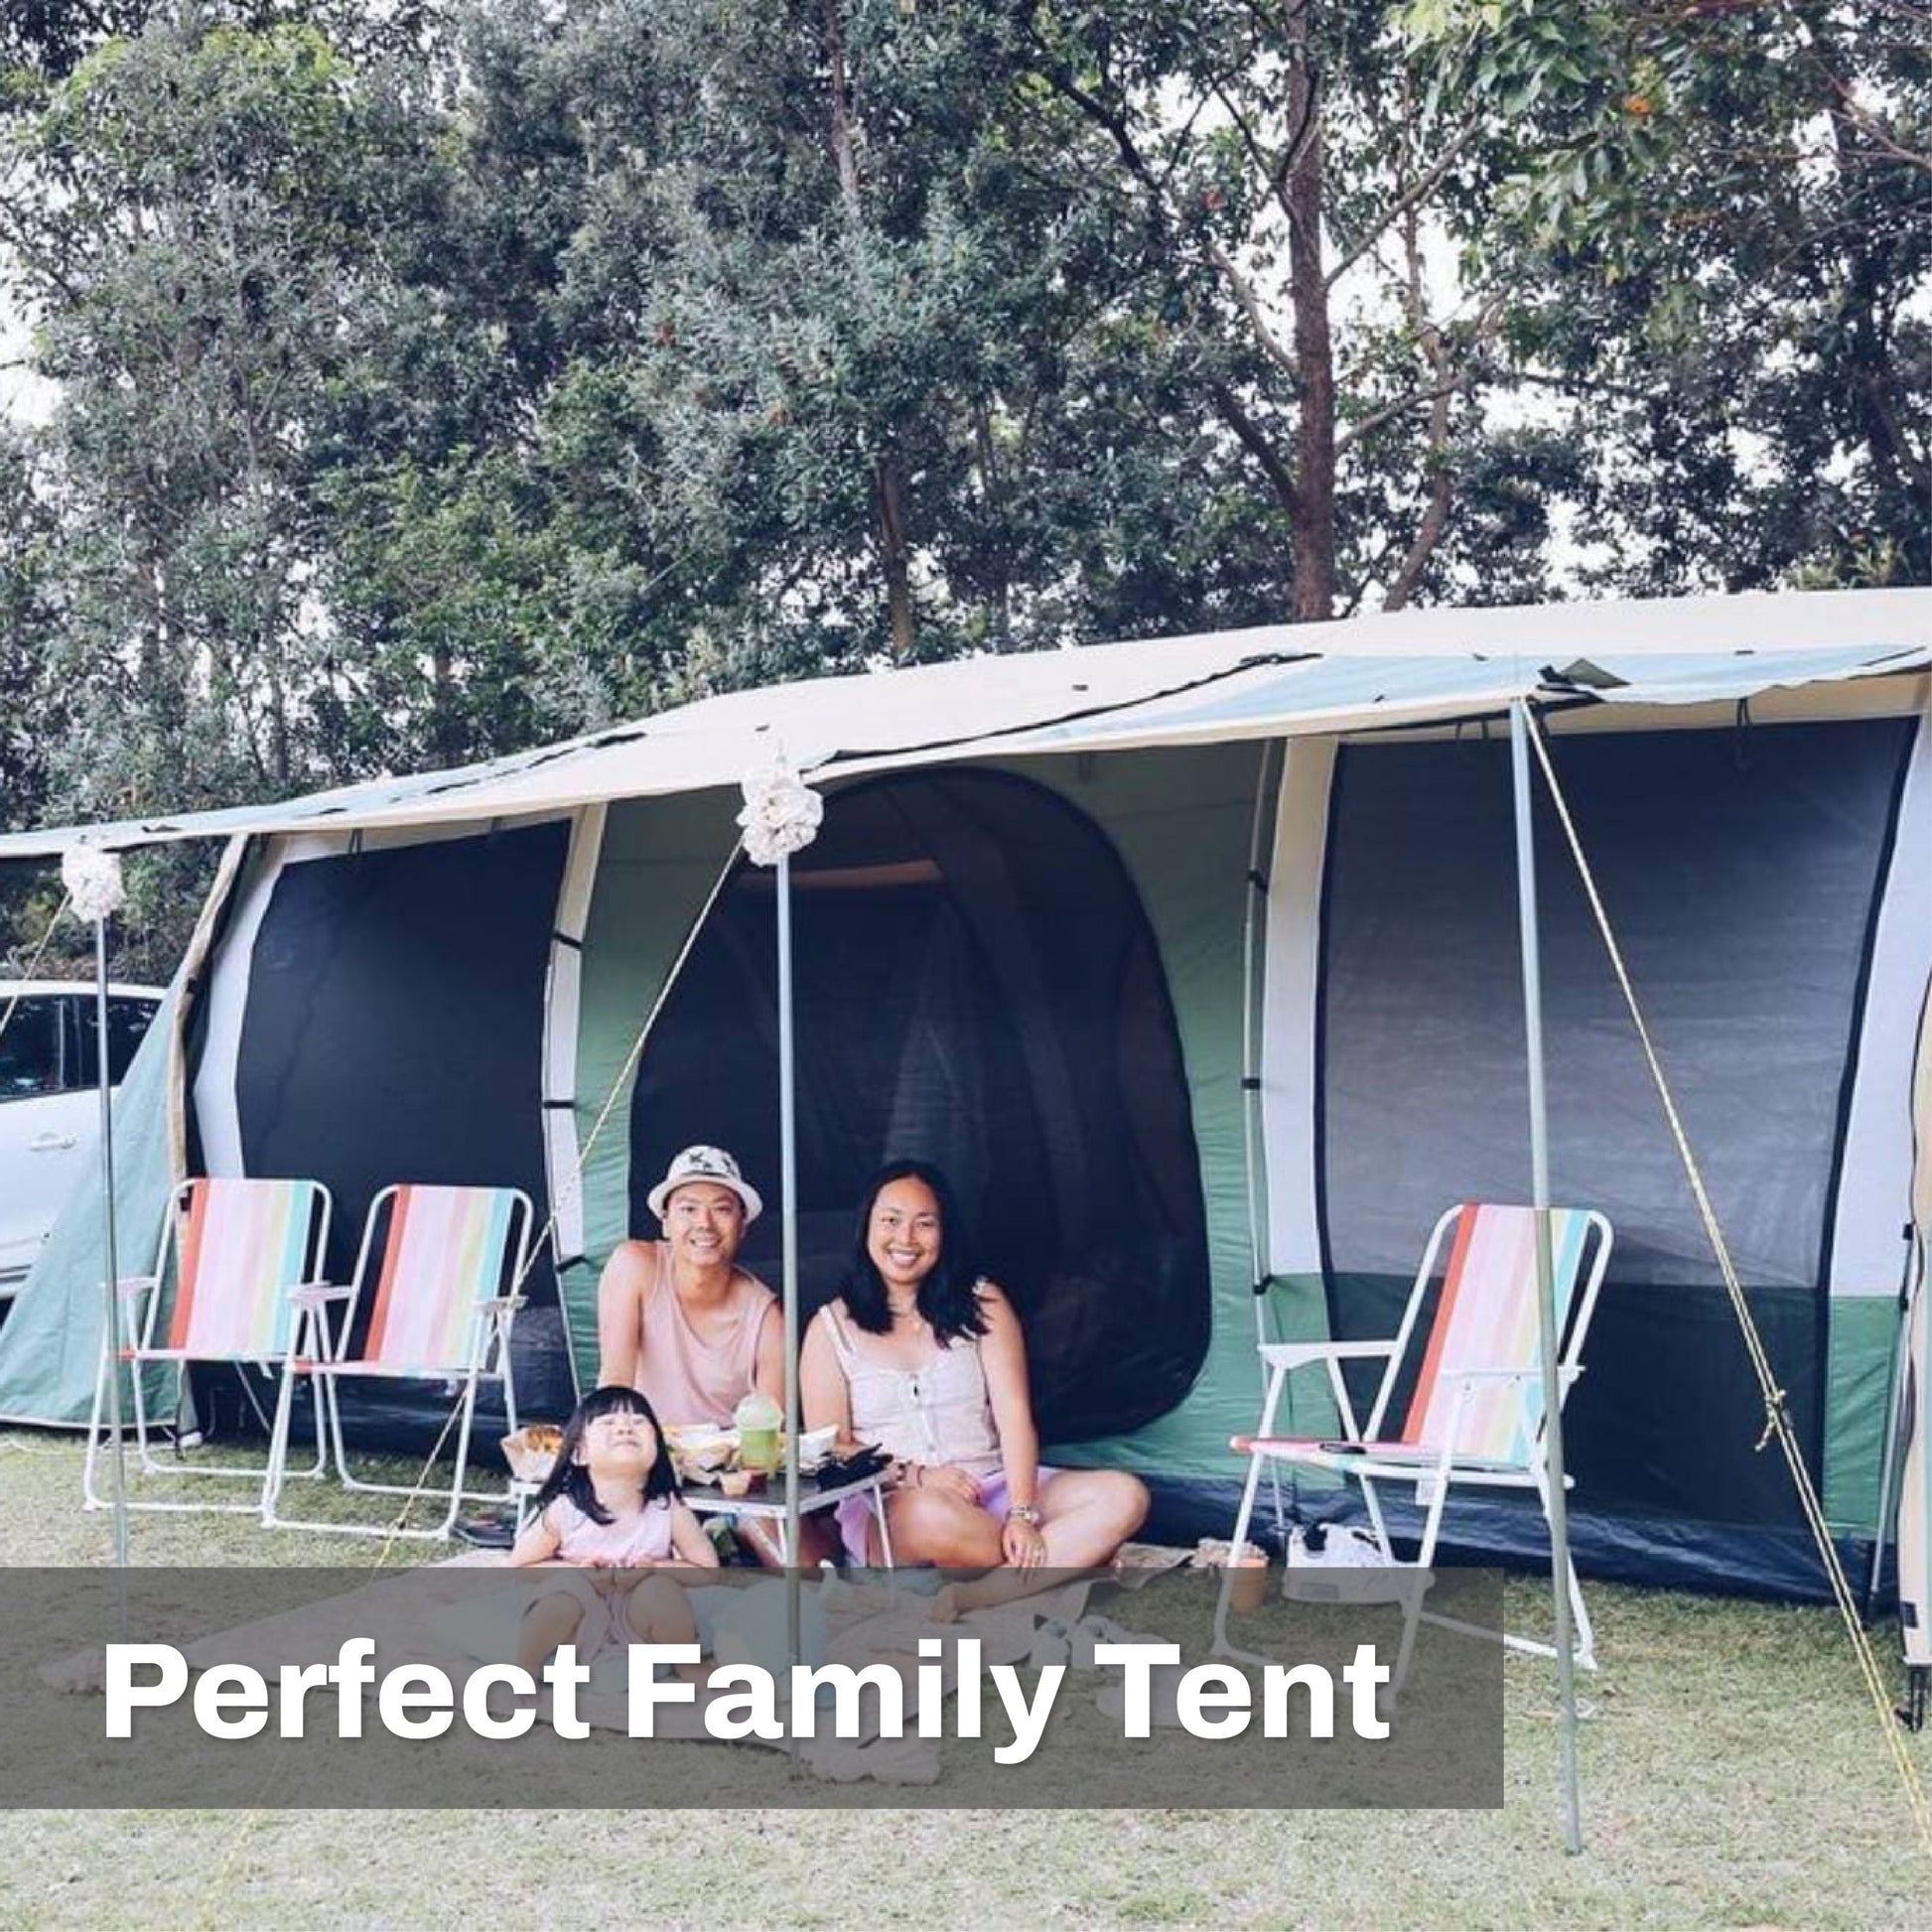 11 Person Cabin Tent with Screen Room 17' x 12'  Family tent camping, Tent  glamping, Cabin tent